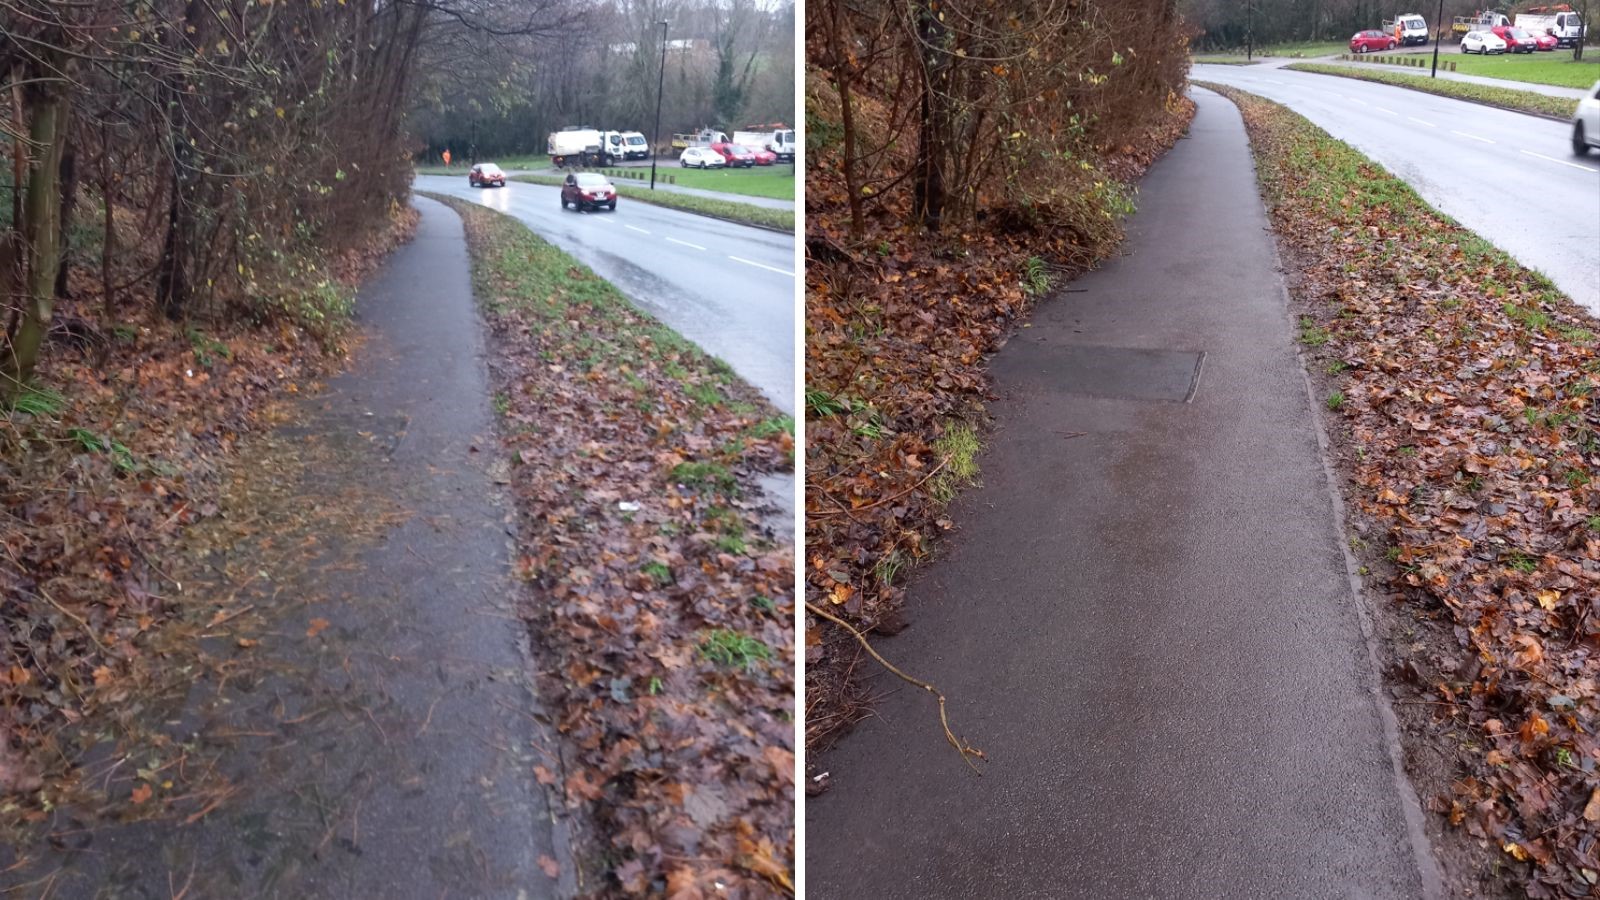 Two images of Beaver Hill. One shows the pavement covered in leaves while the second image shows the path after it has been cleared of the leaves